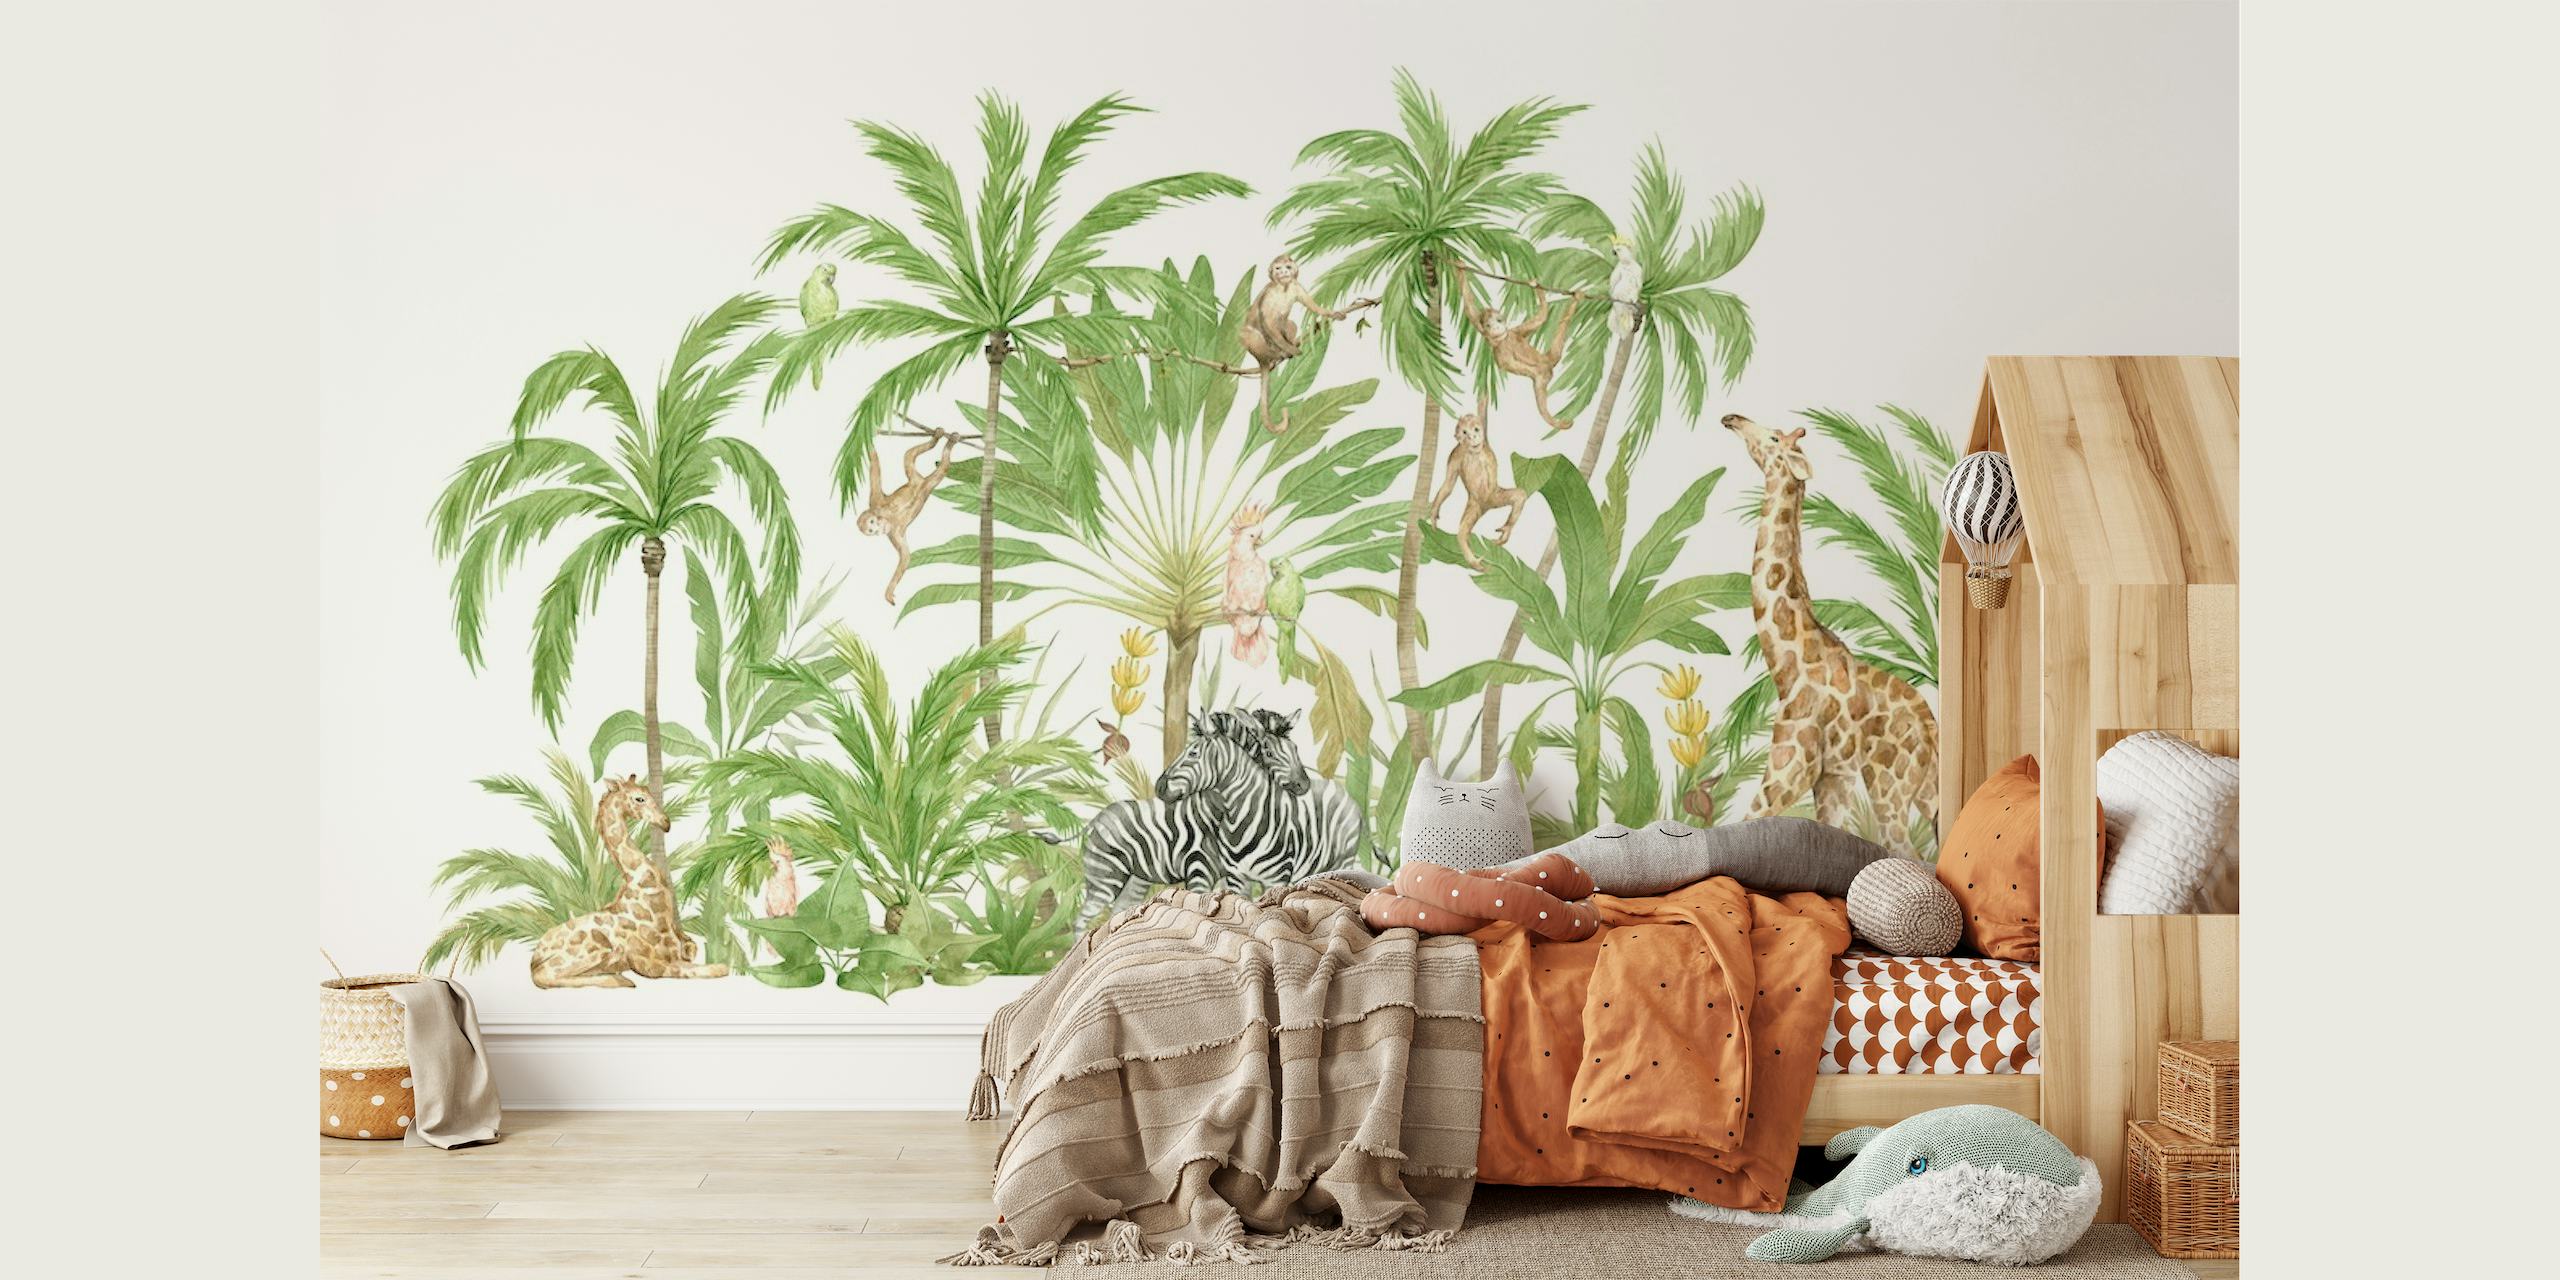 Illustration of peaceful safari scene with wildlife and tropical plants on wall mural